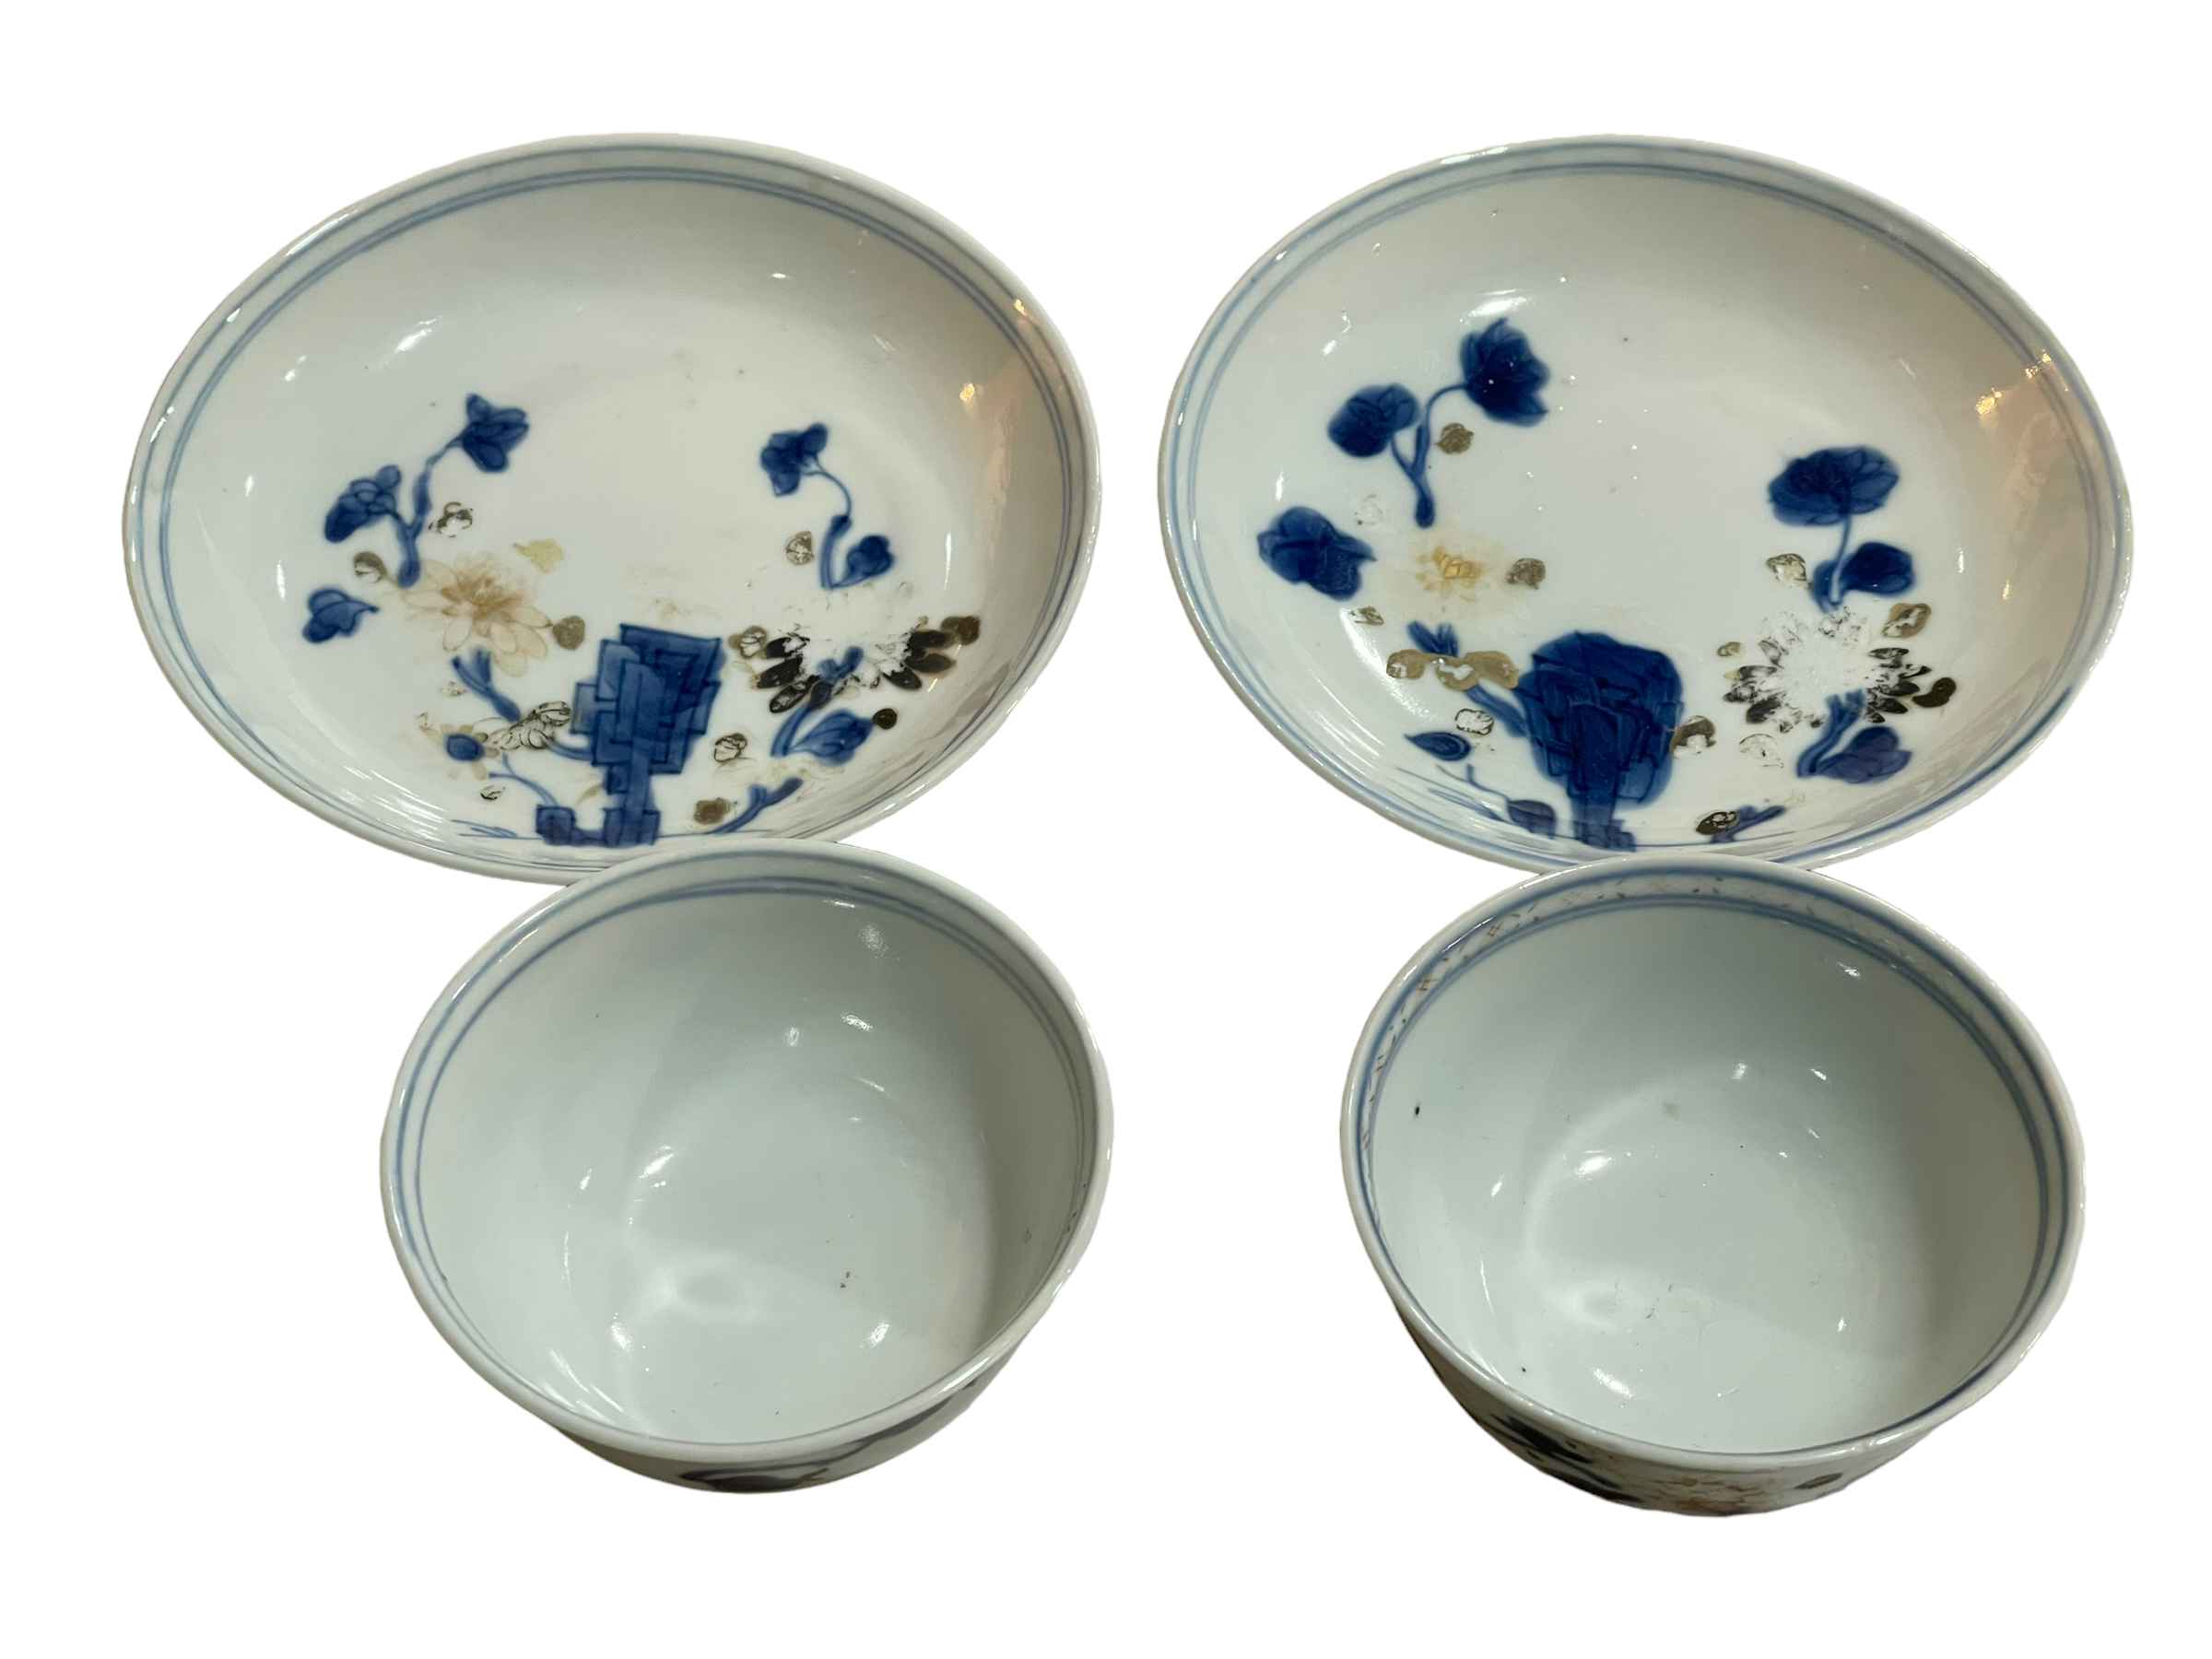 Two Nanking Cargo blue and white tea bowls and saucers, Lot 5709 Christies Sale.